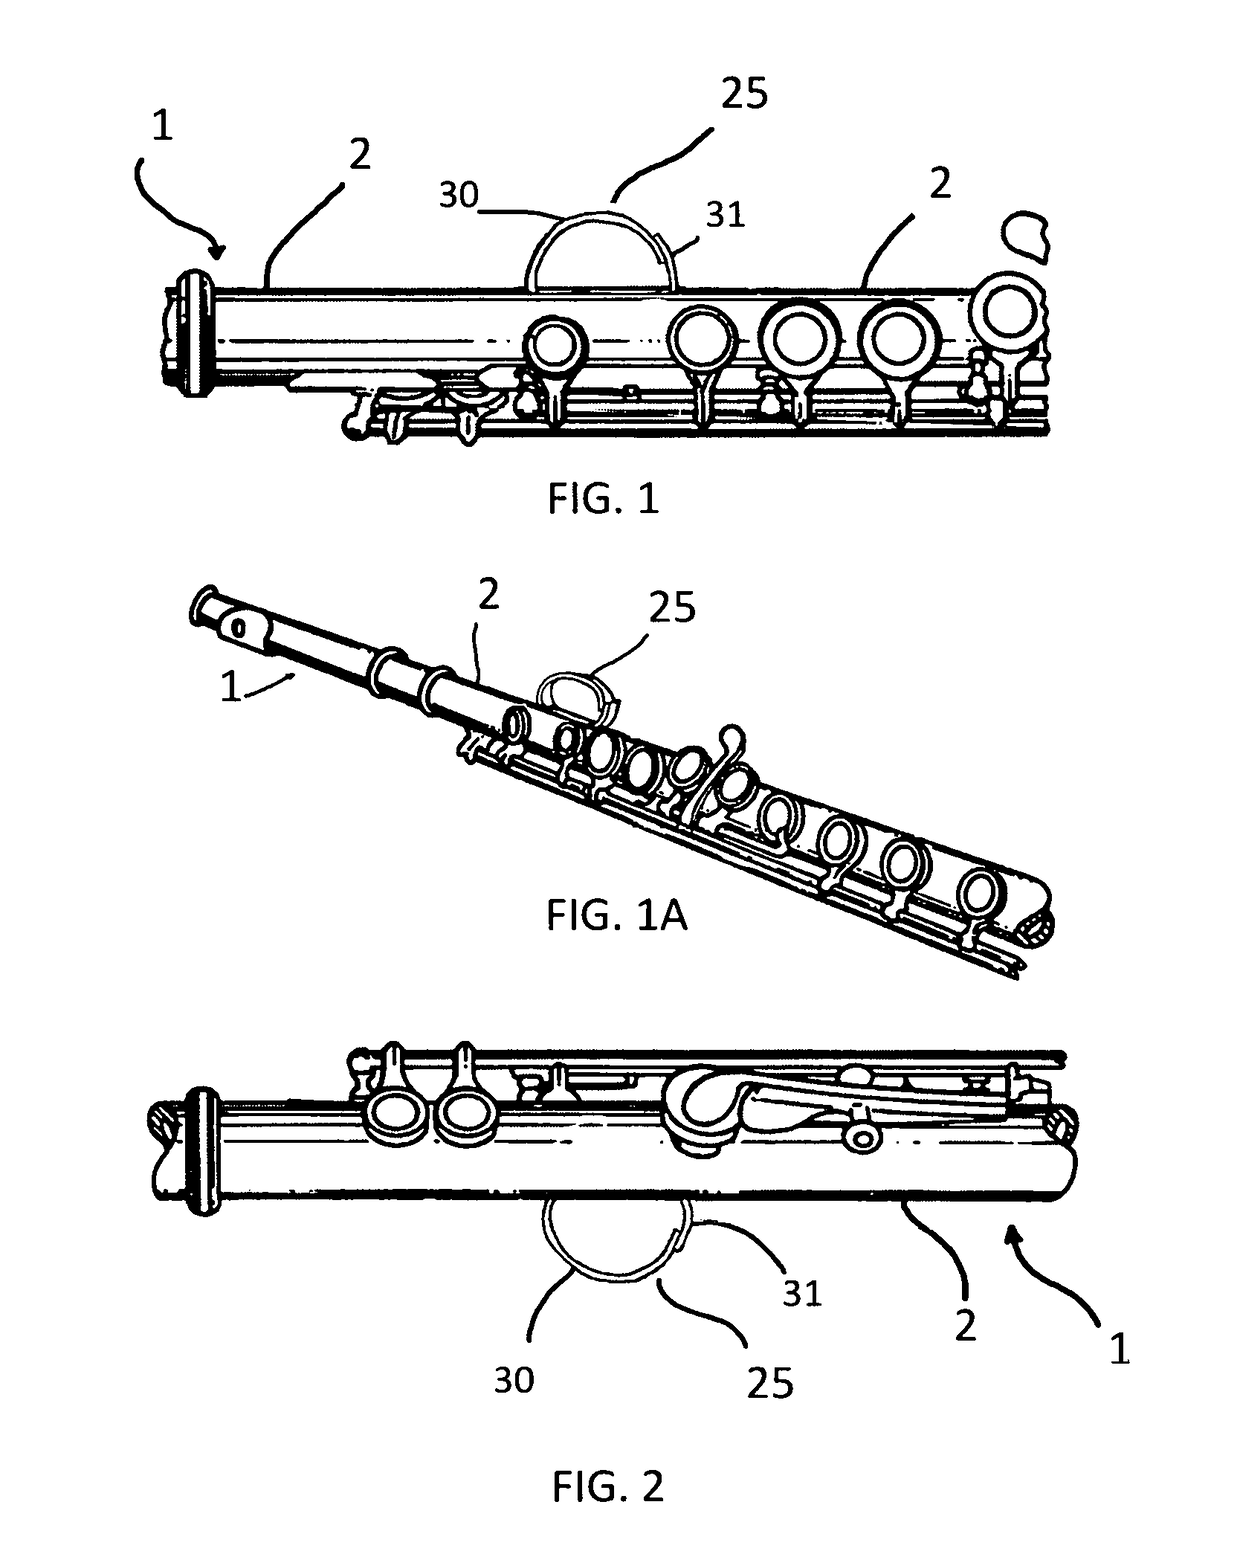 Flute with Enhanced Flute-Finger Connection